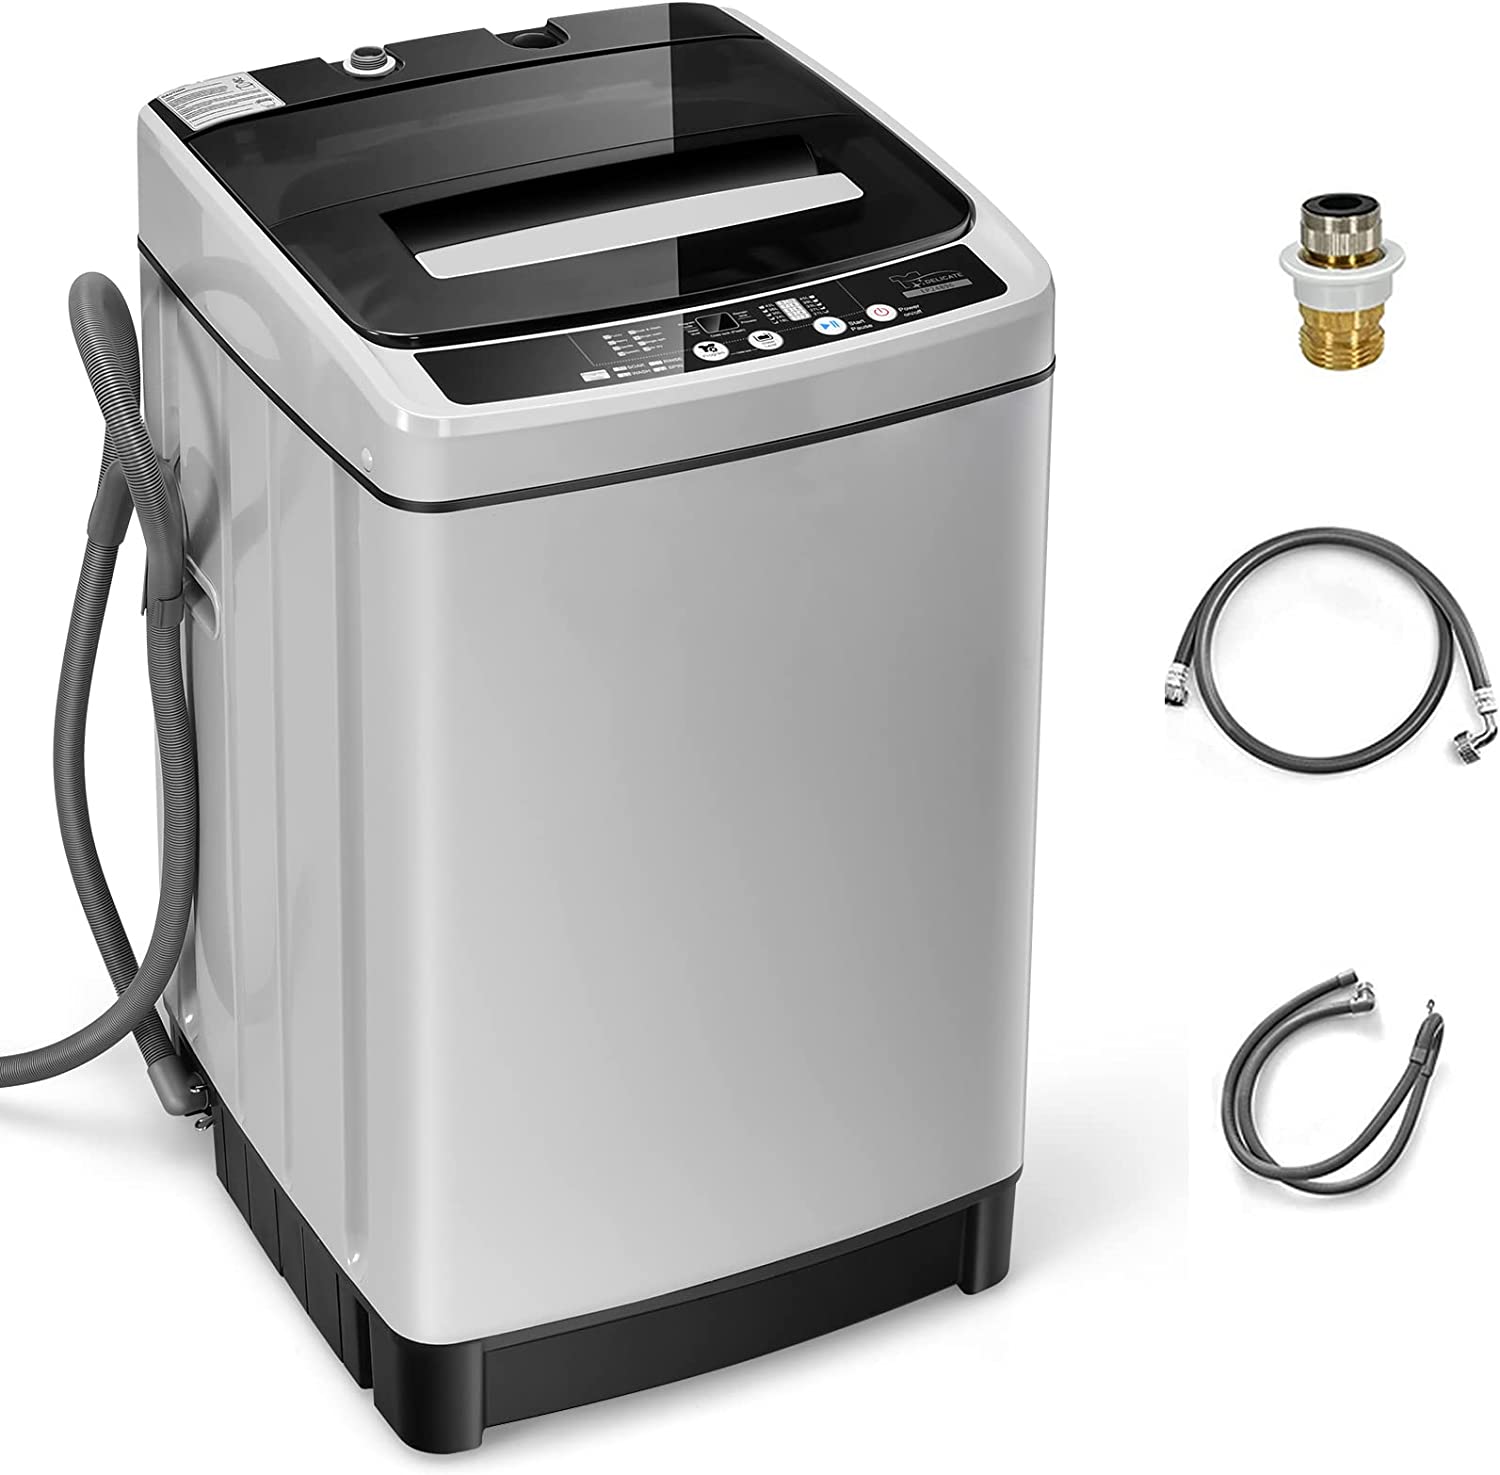 3. Giantex Full Automatic Top Load Washer